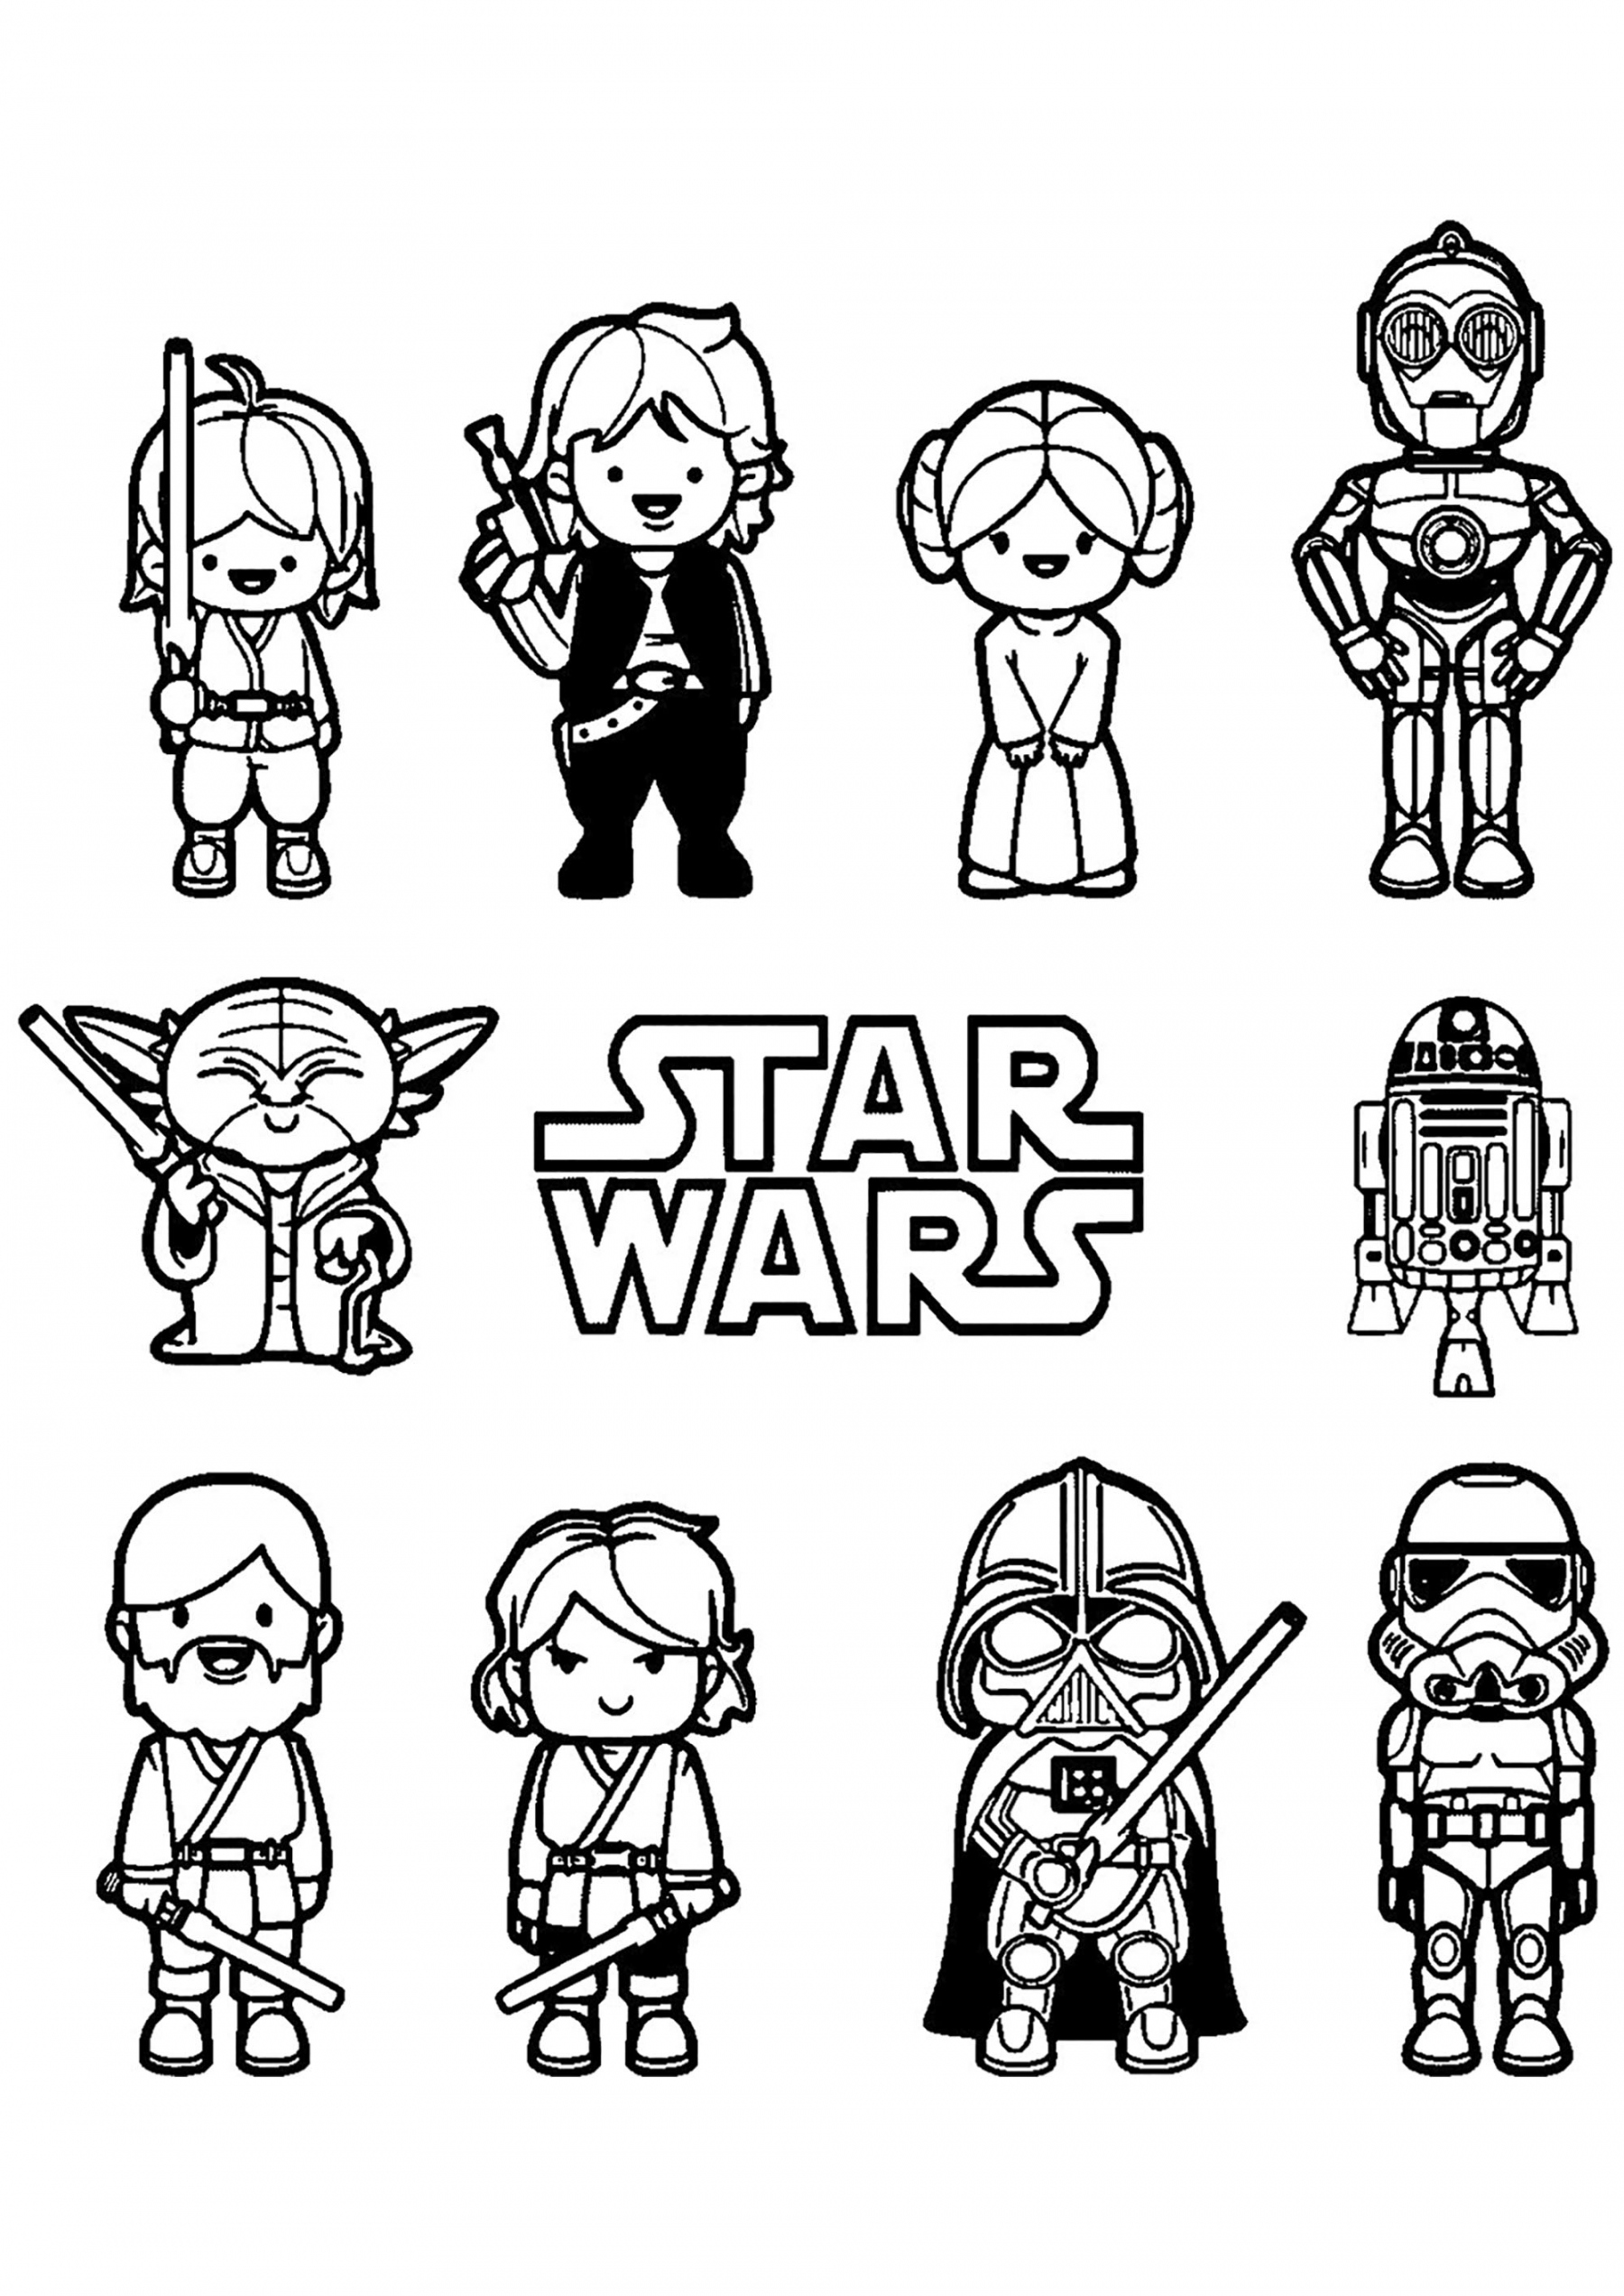 Small Star Wars characters - Star Wars Kids Coloring Pages - FREE Printables - Free Printable Star Wars Coloring Pages